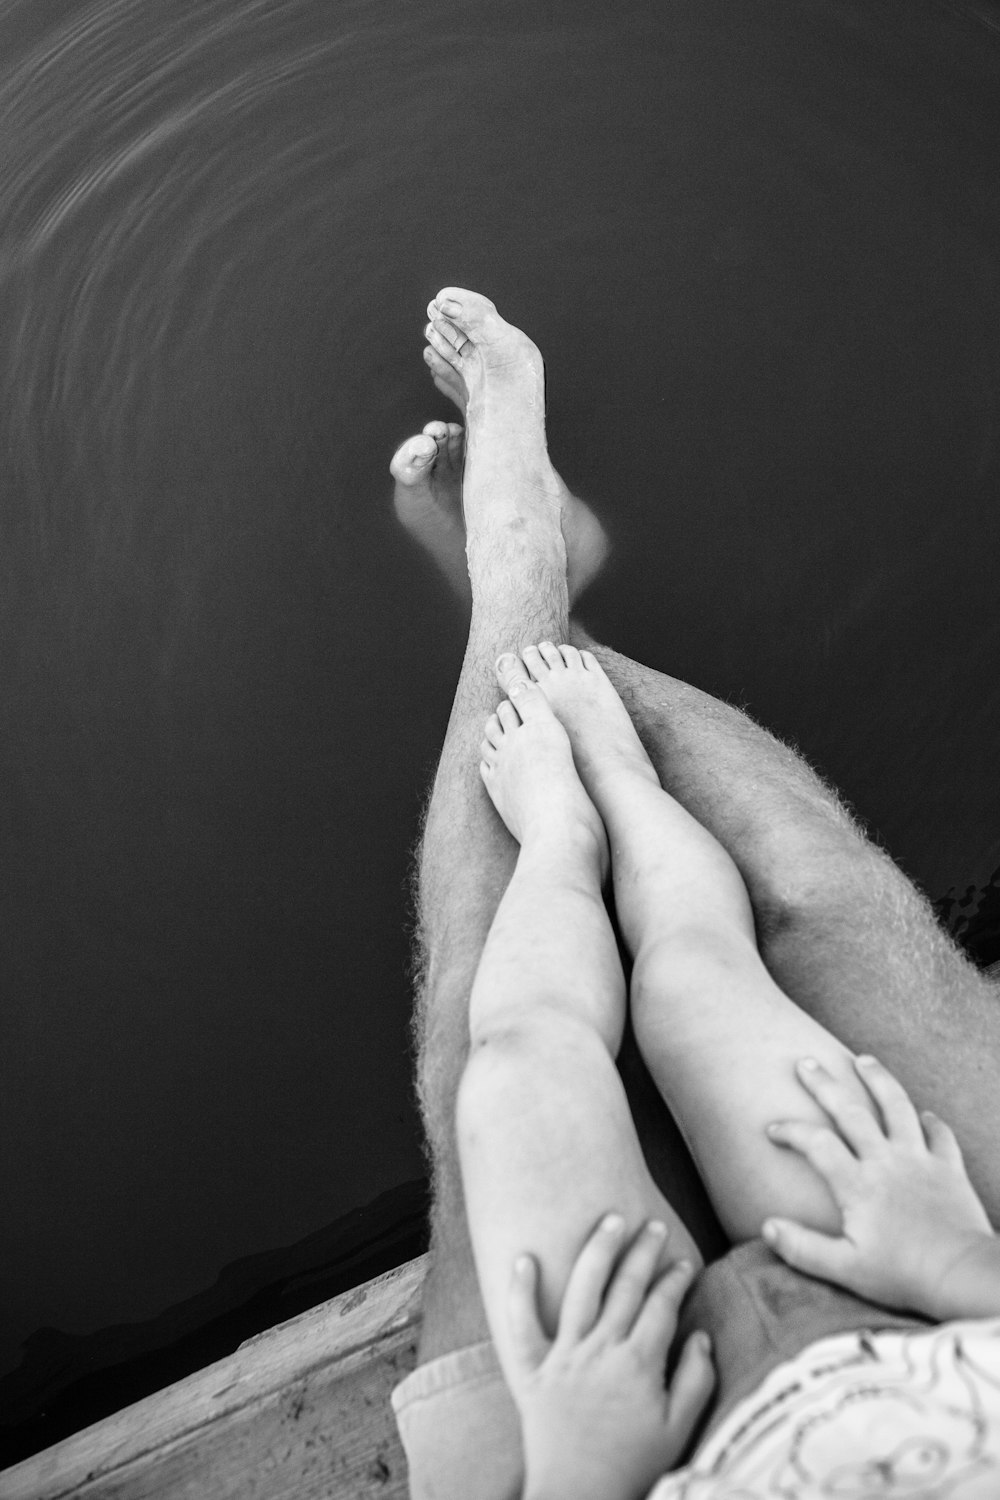 grayscale photo of person's feet on body of water